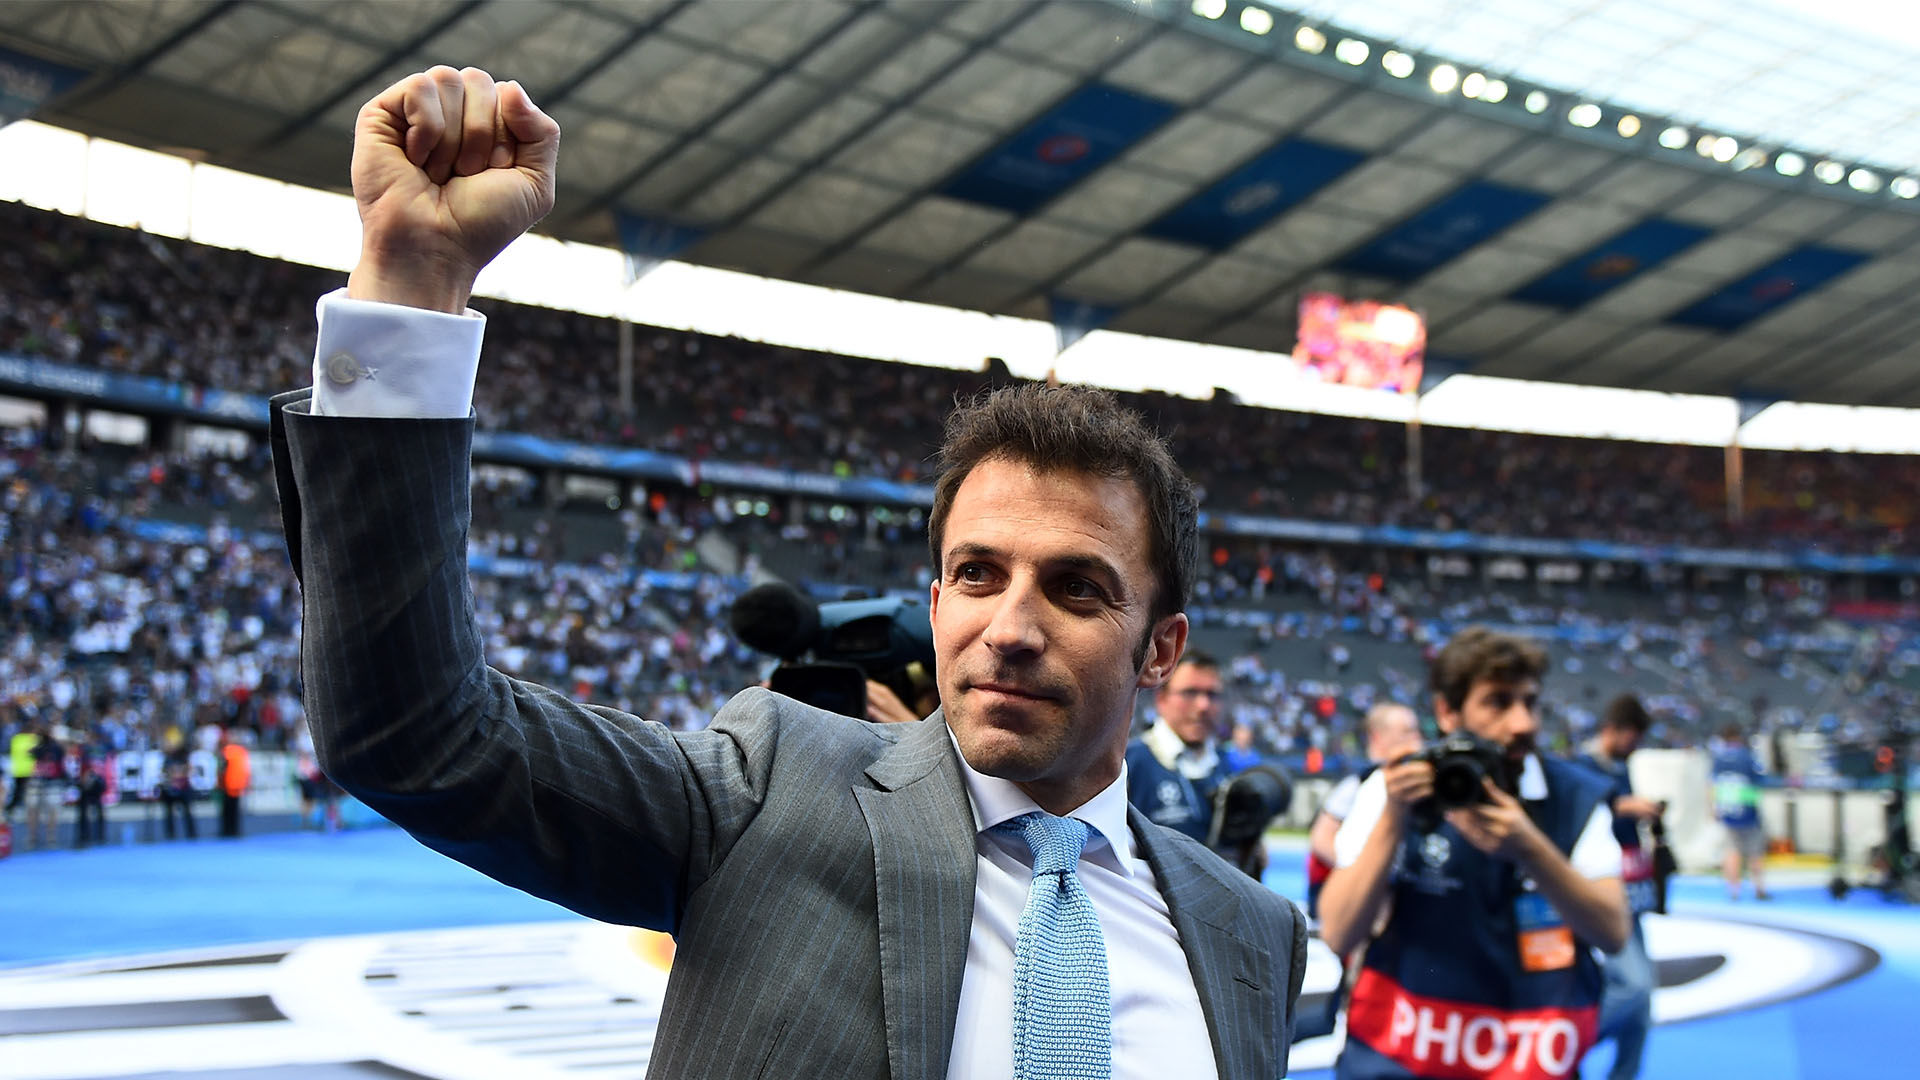 Alessandro Del Piero dished on vast football-related topics but dribbled past the queries about his potential Juventus future in an interview.